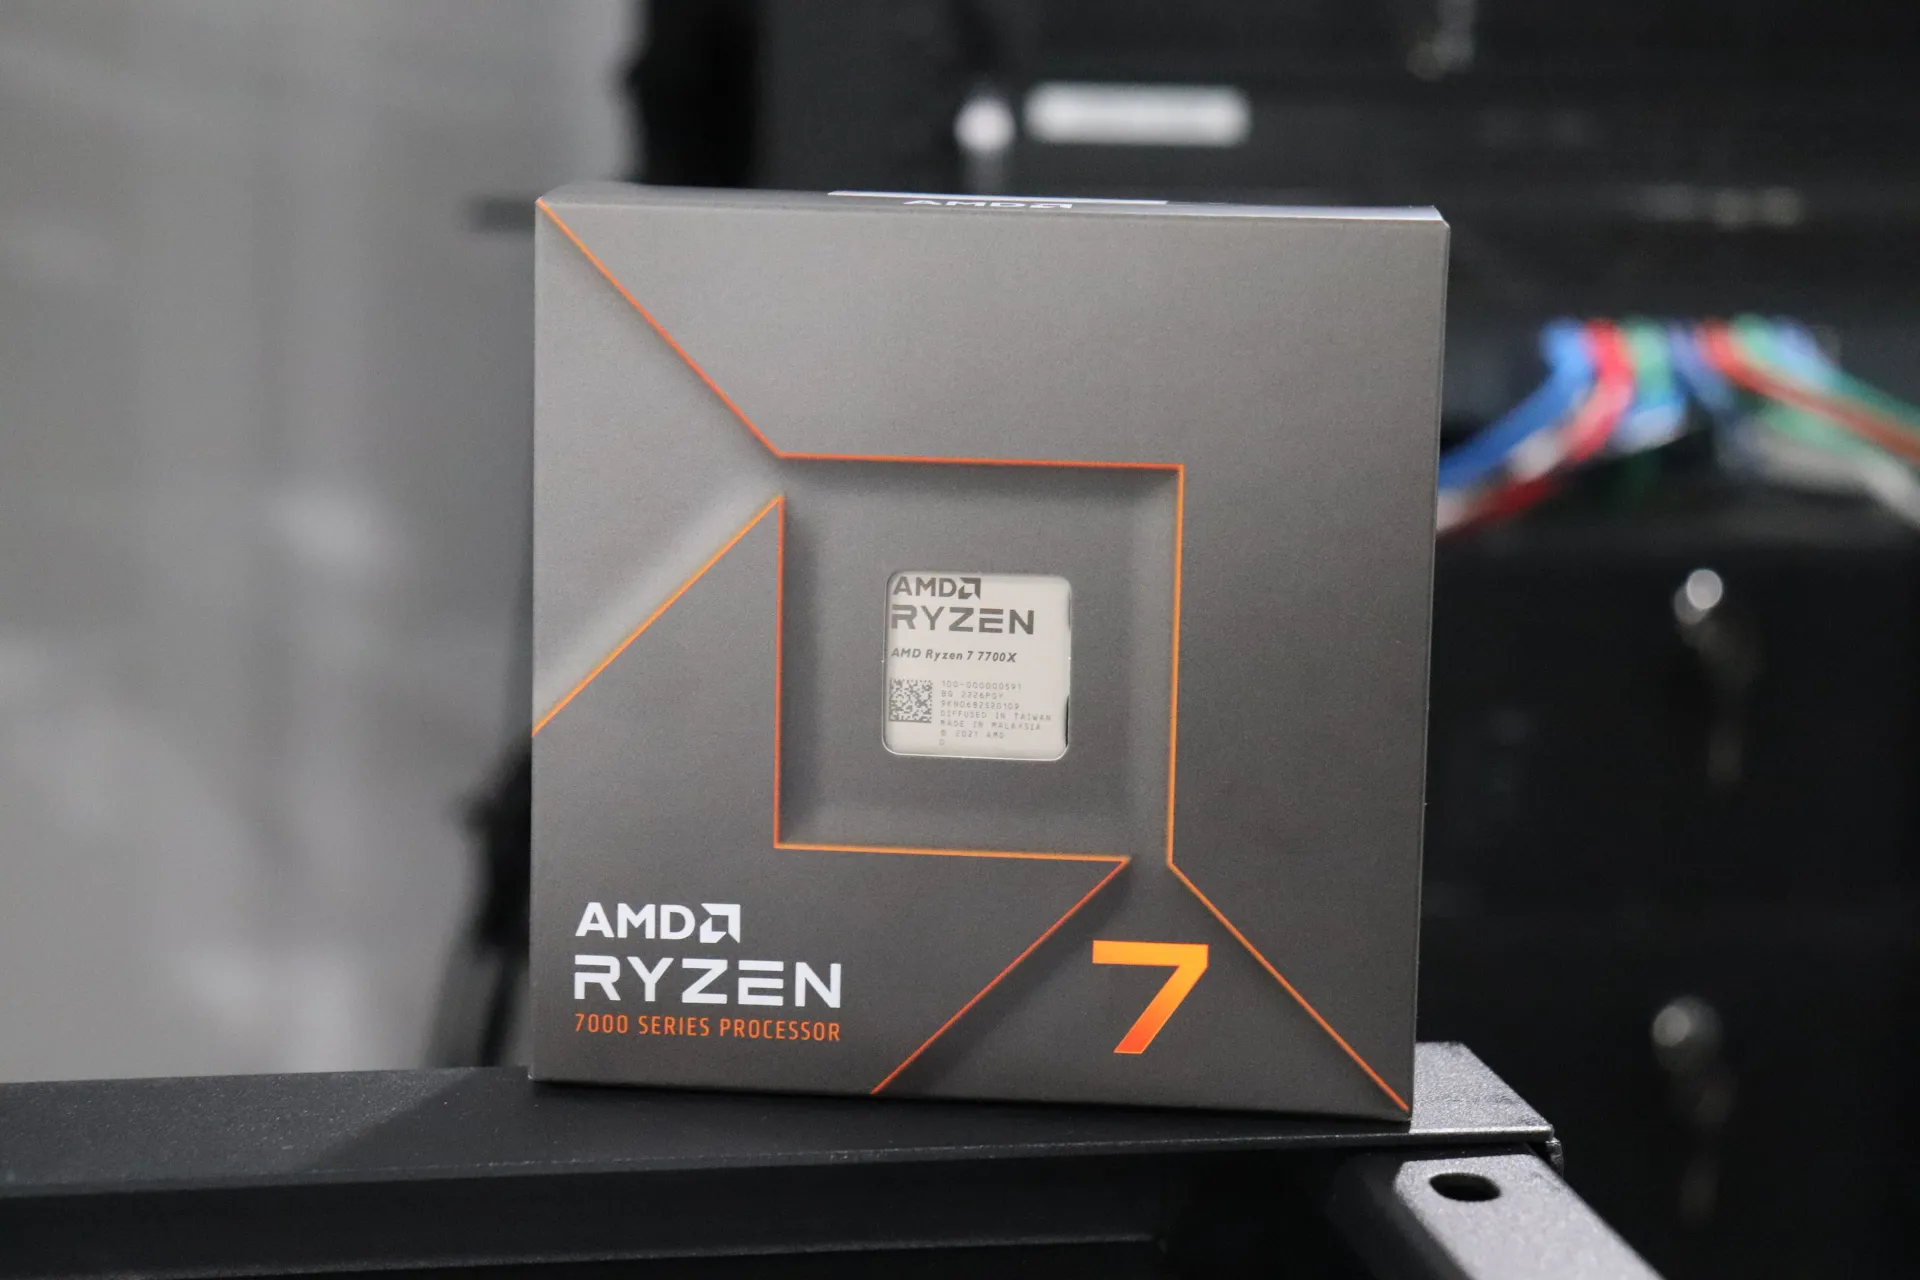 Is the AMD Ryzen 7 7700X worth buying over the Core i7 12700K and